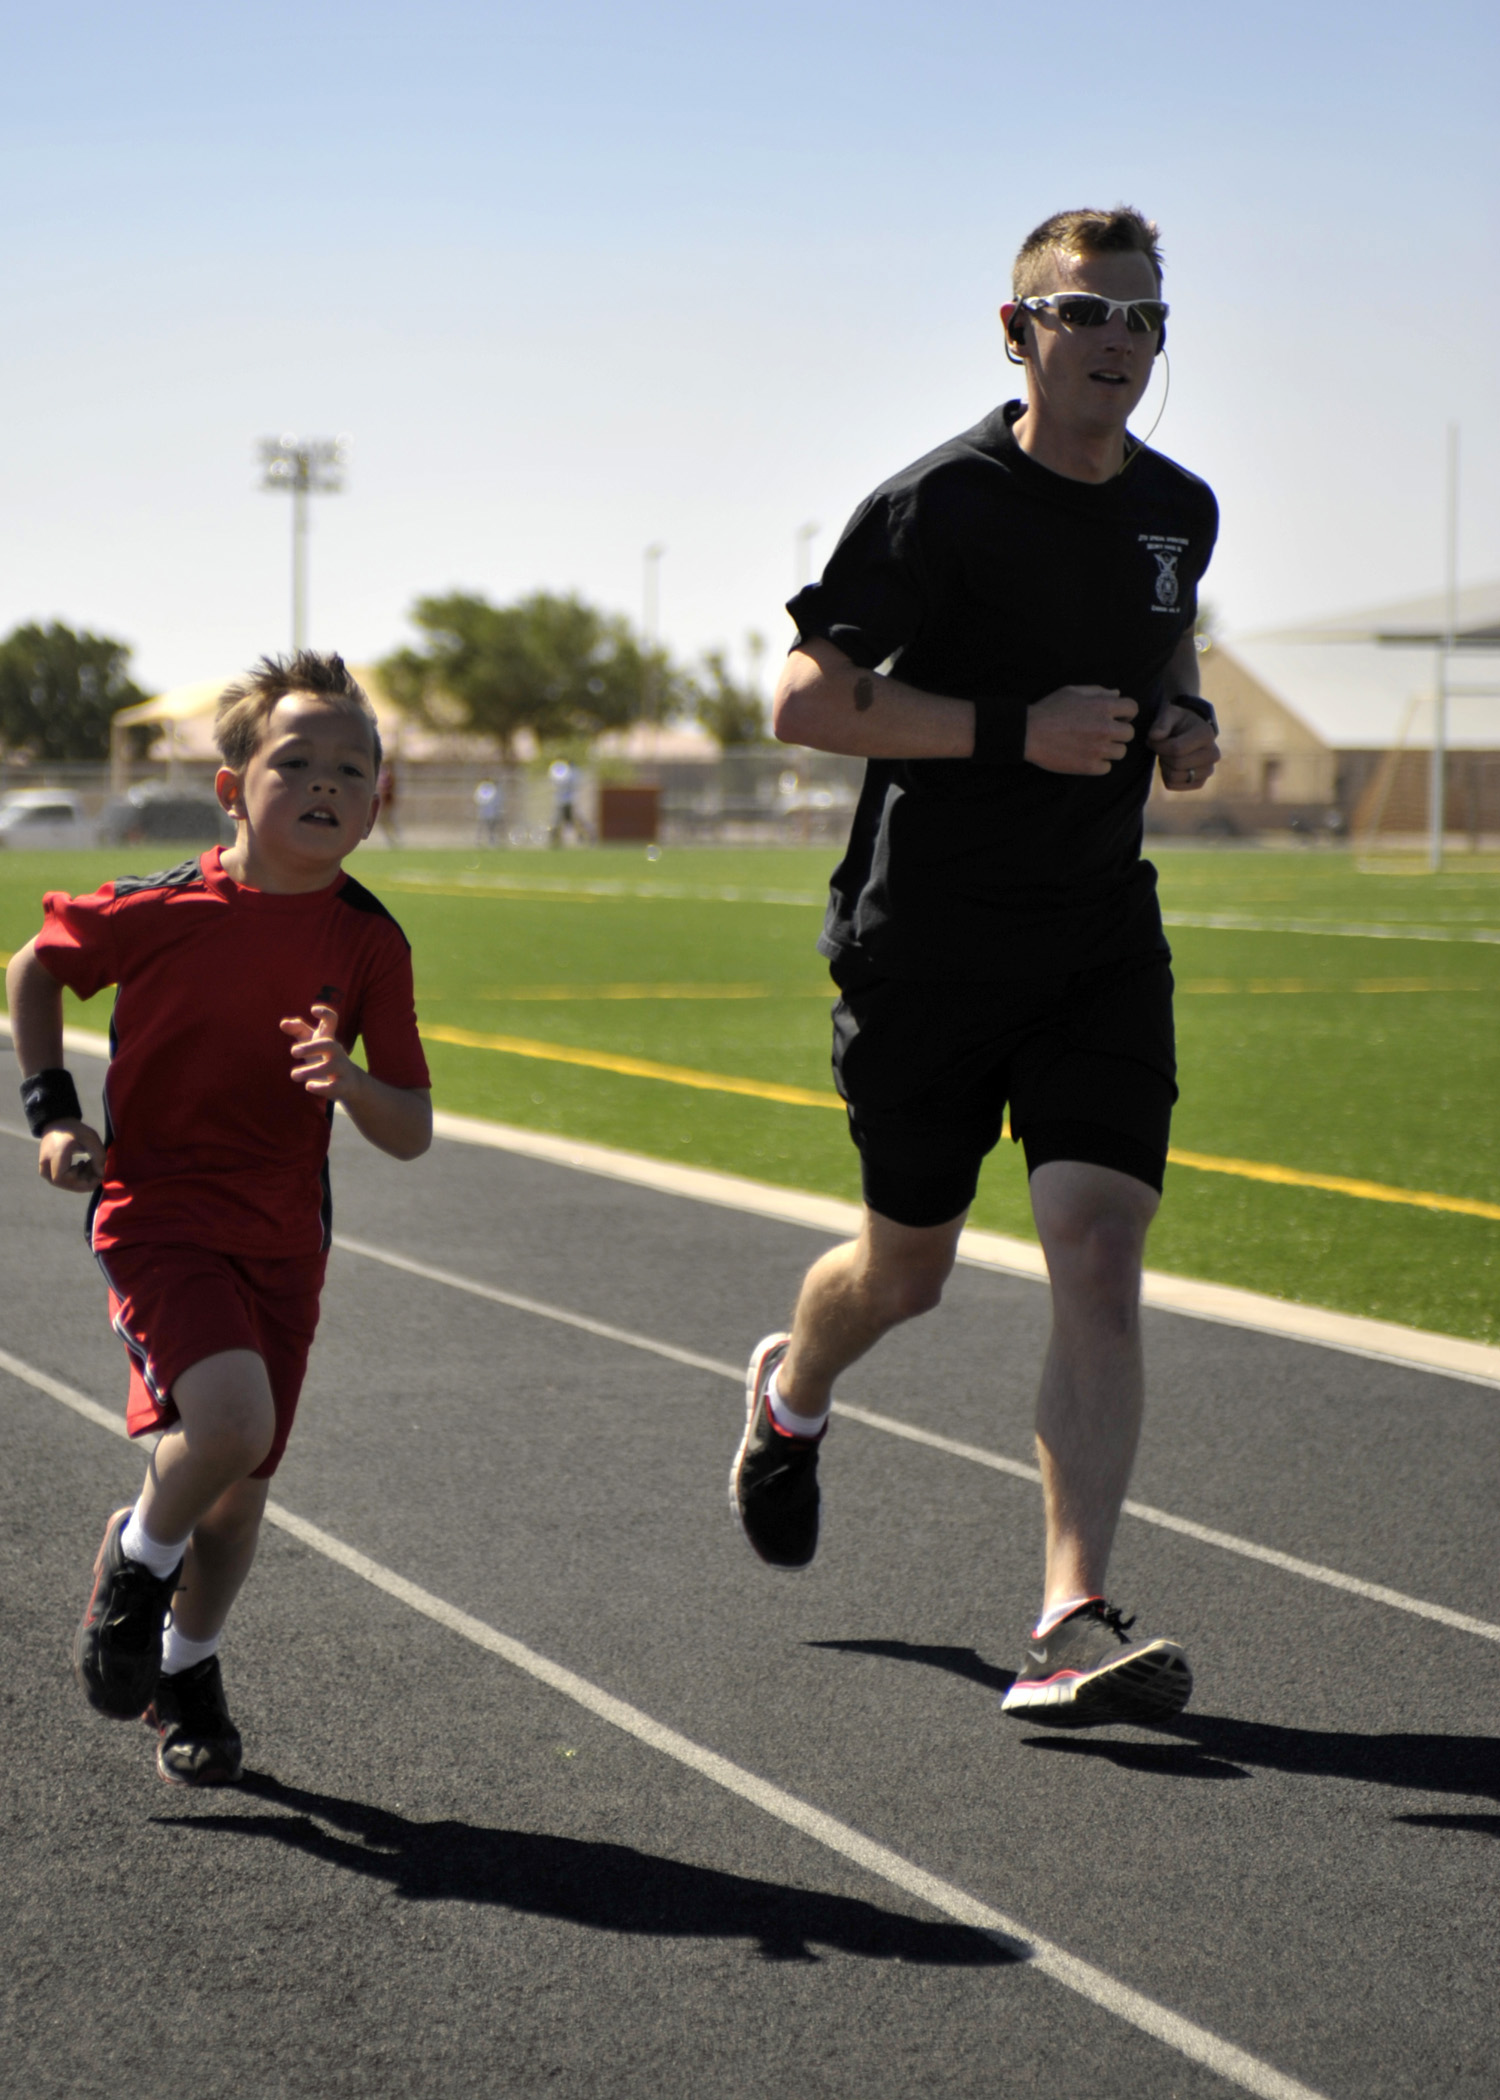 U.S. Air Force Tech. Sgt. Robert Wilson, 27th Special Operations Security Forces Squadron, and son Tyler , 7, sprint to the finish of the two mile race during the Americas Kids Run, at Cannon Air Force Base, N.M. May 21, 2011. Sergeant Wilson and Tyler were two of roughly 70 parents and children that competed in the mornings events. (U.S. Air Force photo by Airman Ericka Engblom)